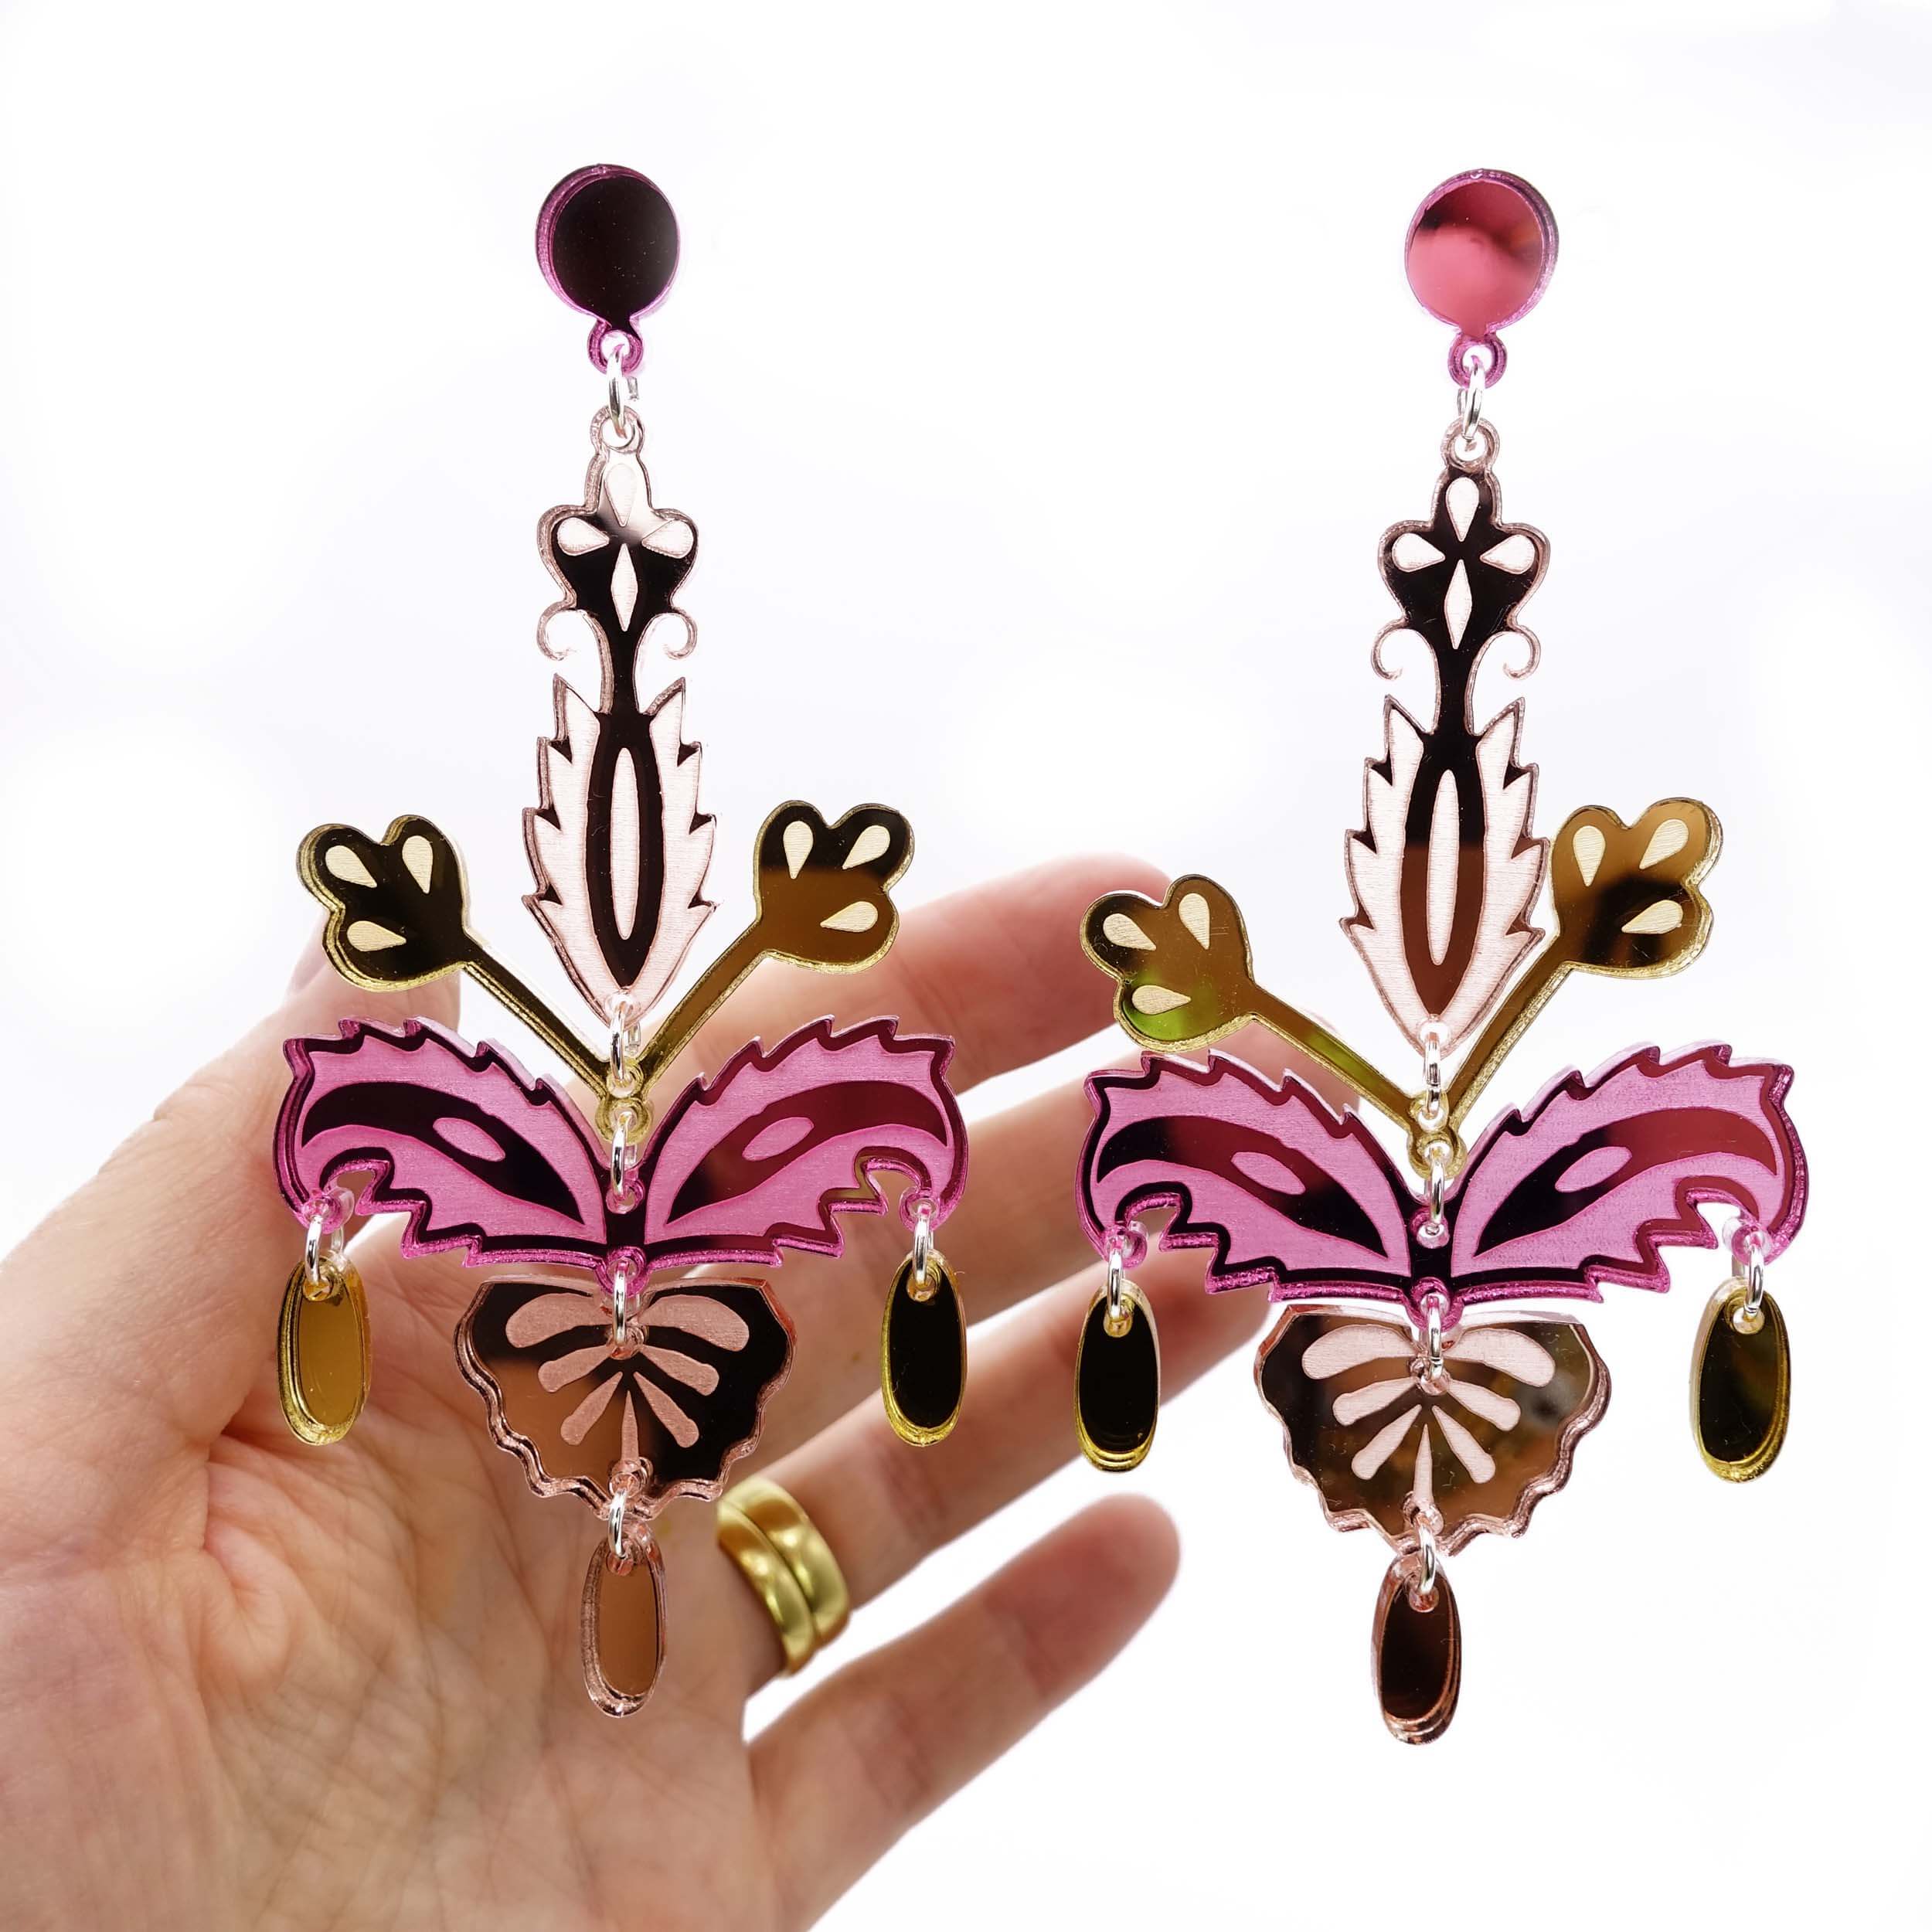 Rose pink and gold Festival drop dangly earrings for going out in the sunshine with friends. Shiny, eye-catching big statement earrings for partying in the sun, designed by Sarah Day for Wear and Resist. 